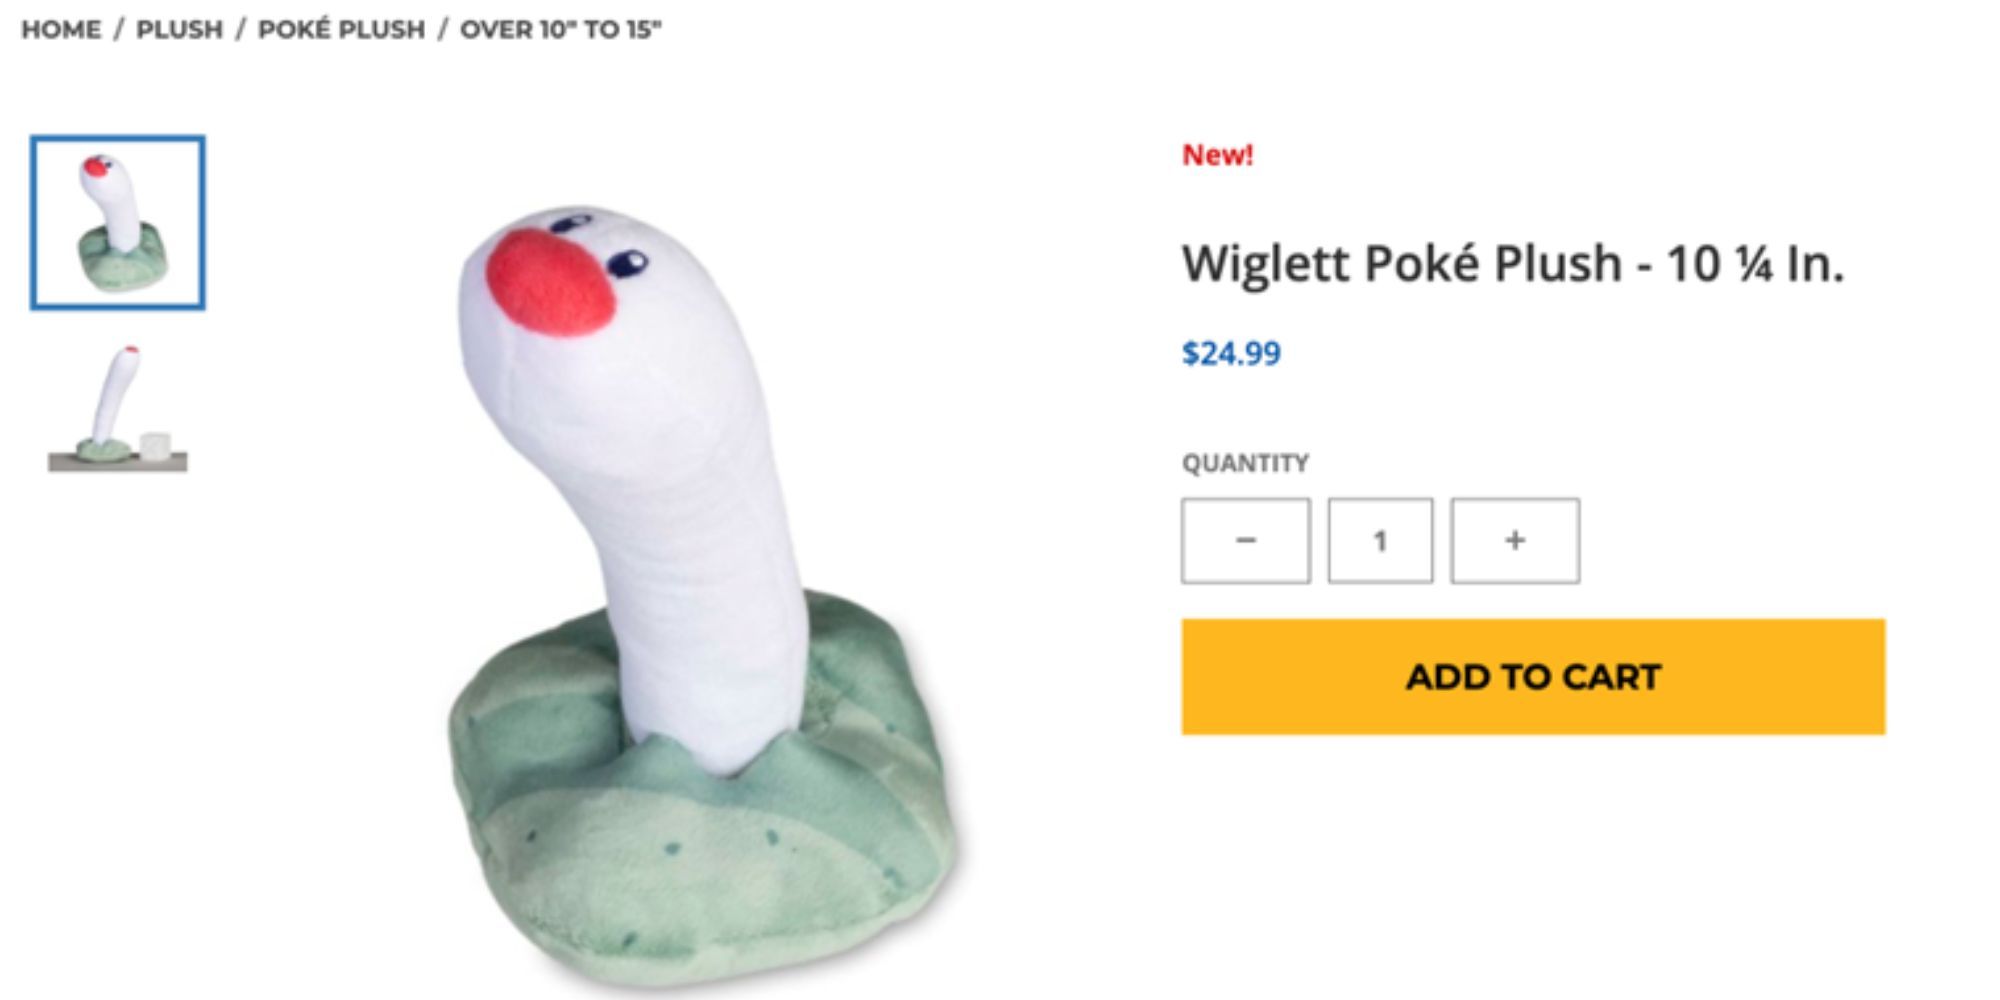 A store page for a Wiglett Pokemon plush toy that looks like a dildo. But not intentionally. 